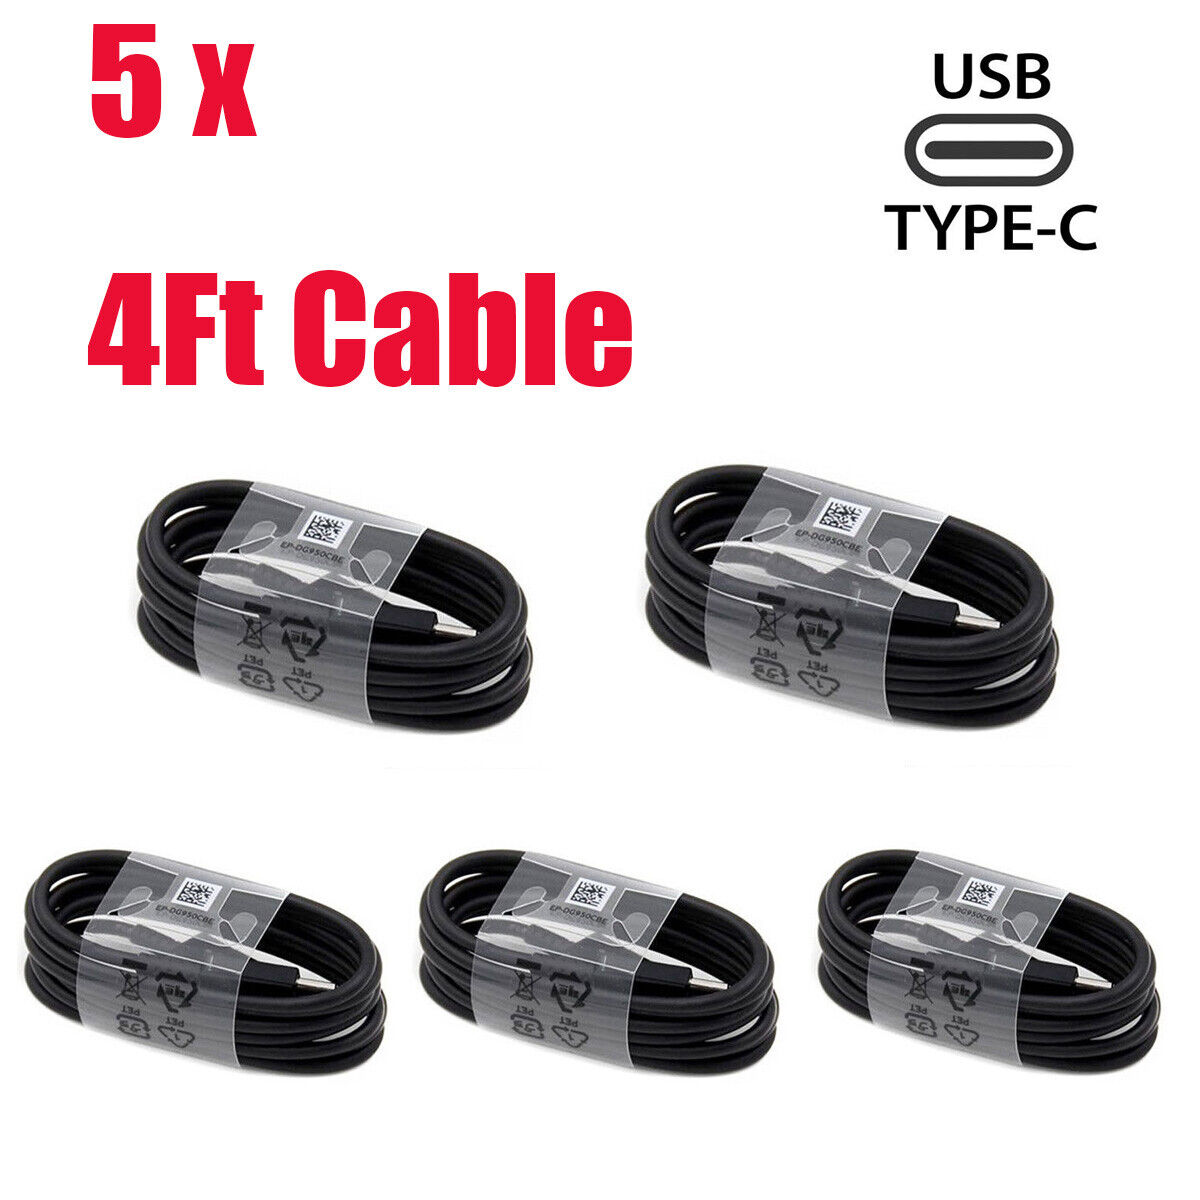 5x USB Cable Type C Fast Charger For Samsung Galaxy S8 S9 S10 S20+ Note 9 10 20 Compatible Brand: Universal, For Ace